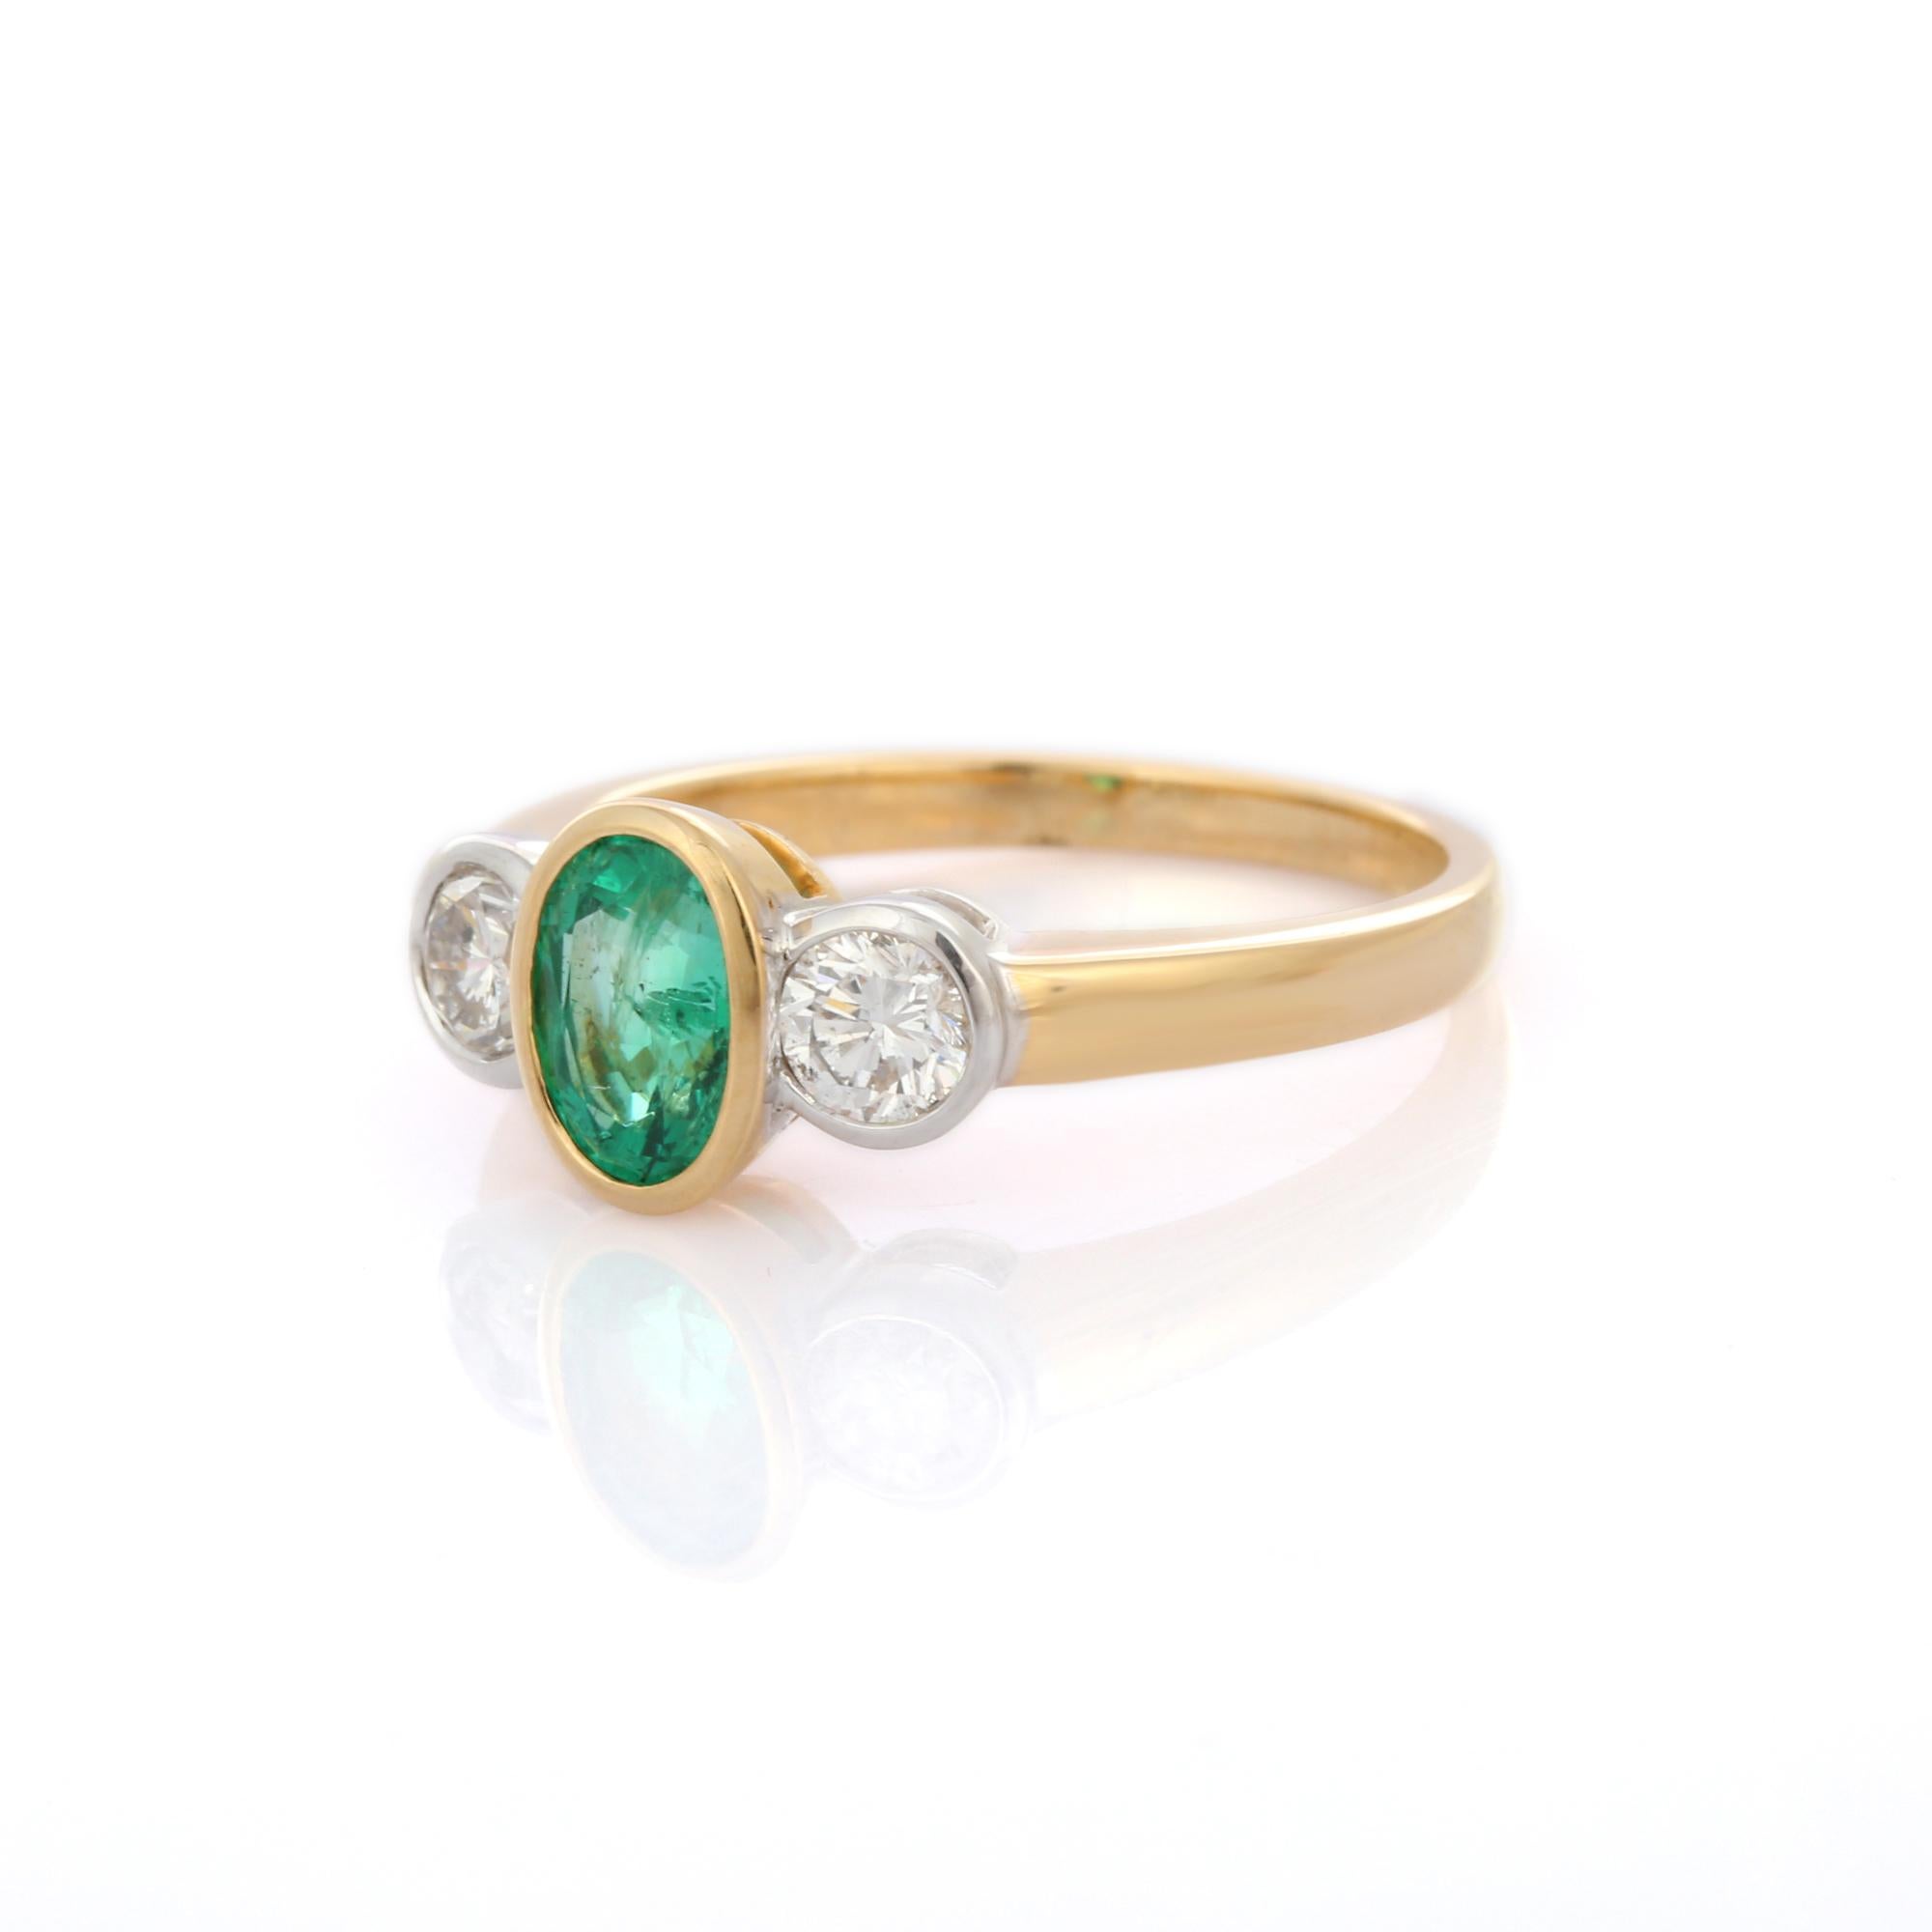 For Sale:  18K Solid Yellow Gold Bezel Set Oval Cut Emerald and Diamond Three Stone Ring  3